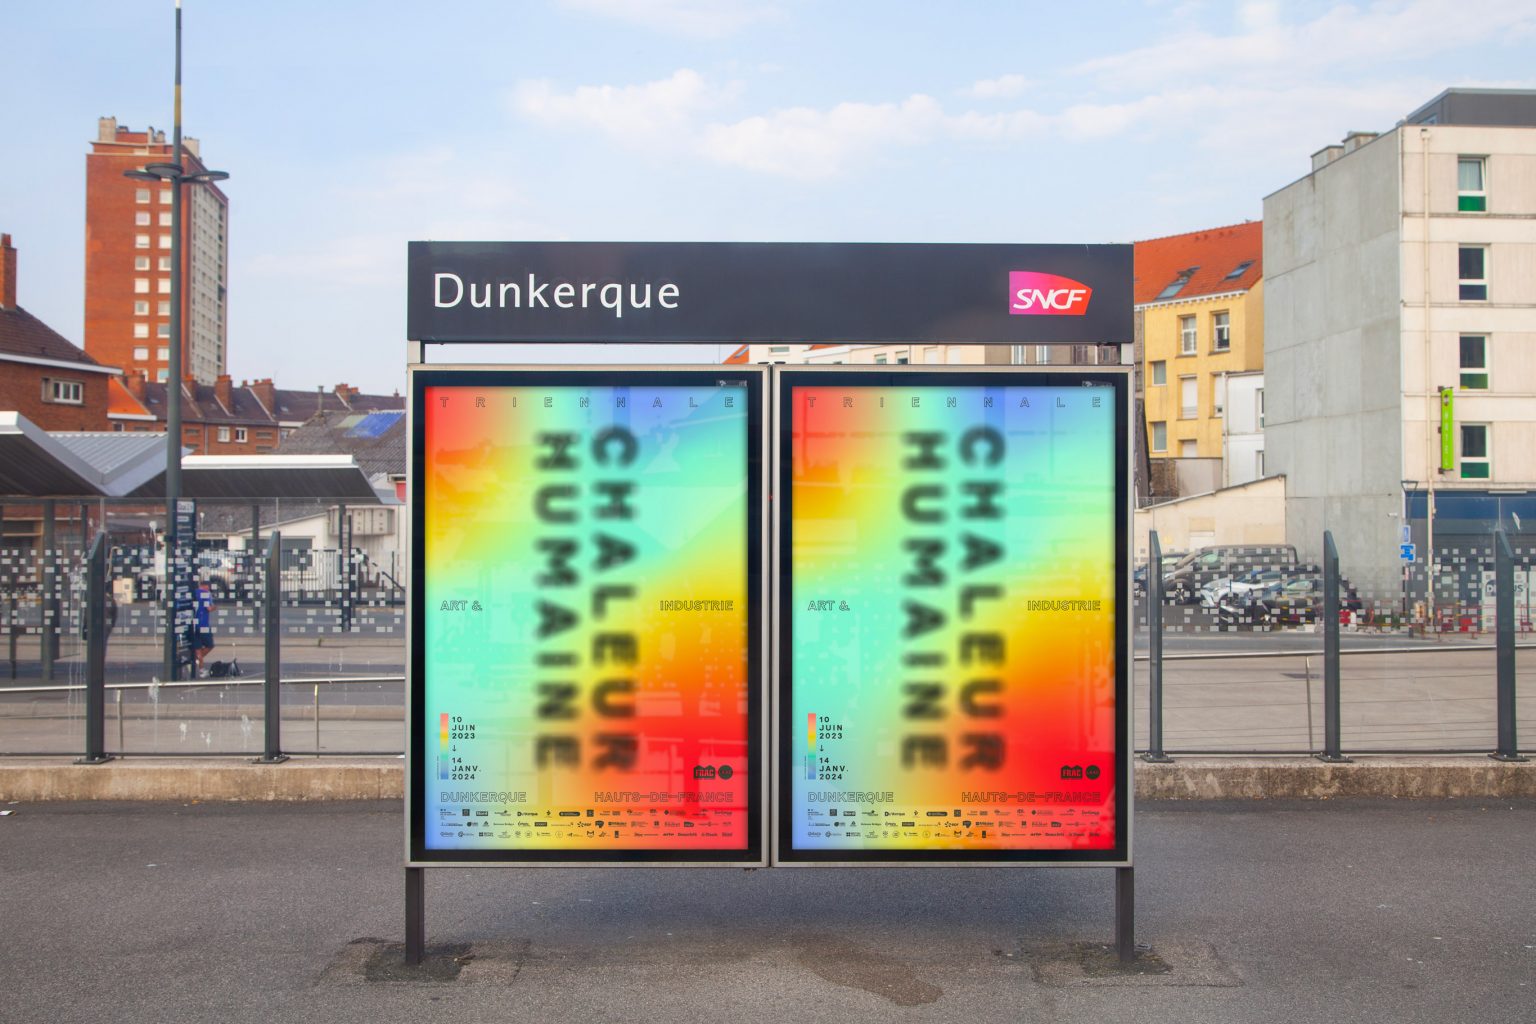 Visual identity for the Triennale Art & Industrie, Dunkerque, North of France, designed by In the shade of a tree studio, founded by Sophie Demay and Maël Fournier Comte, joined by Jimmy Cintero.